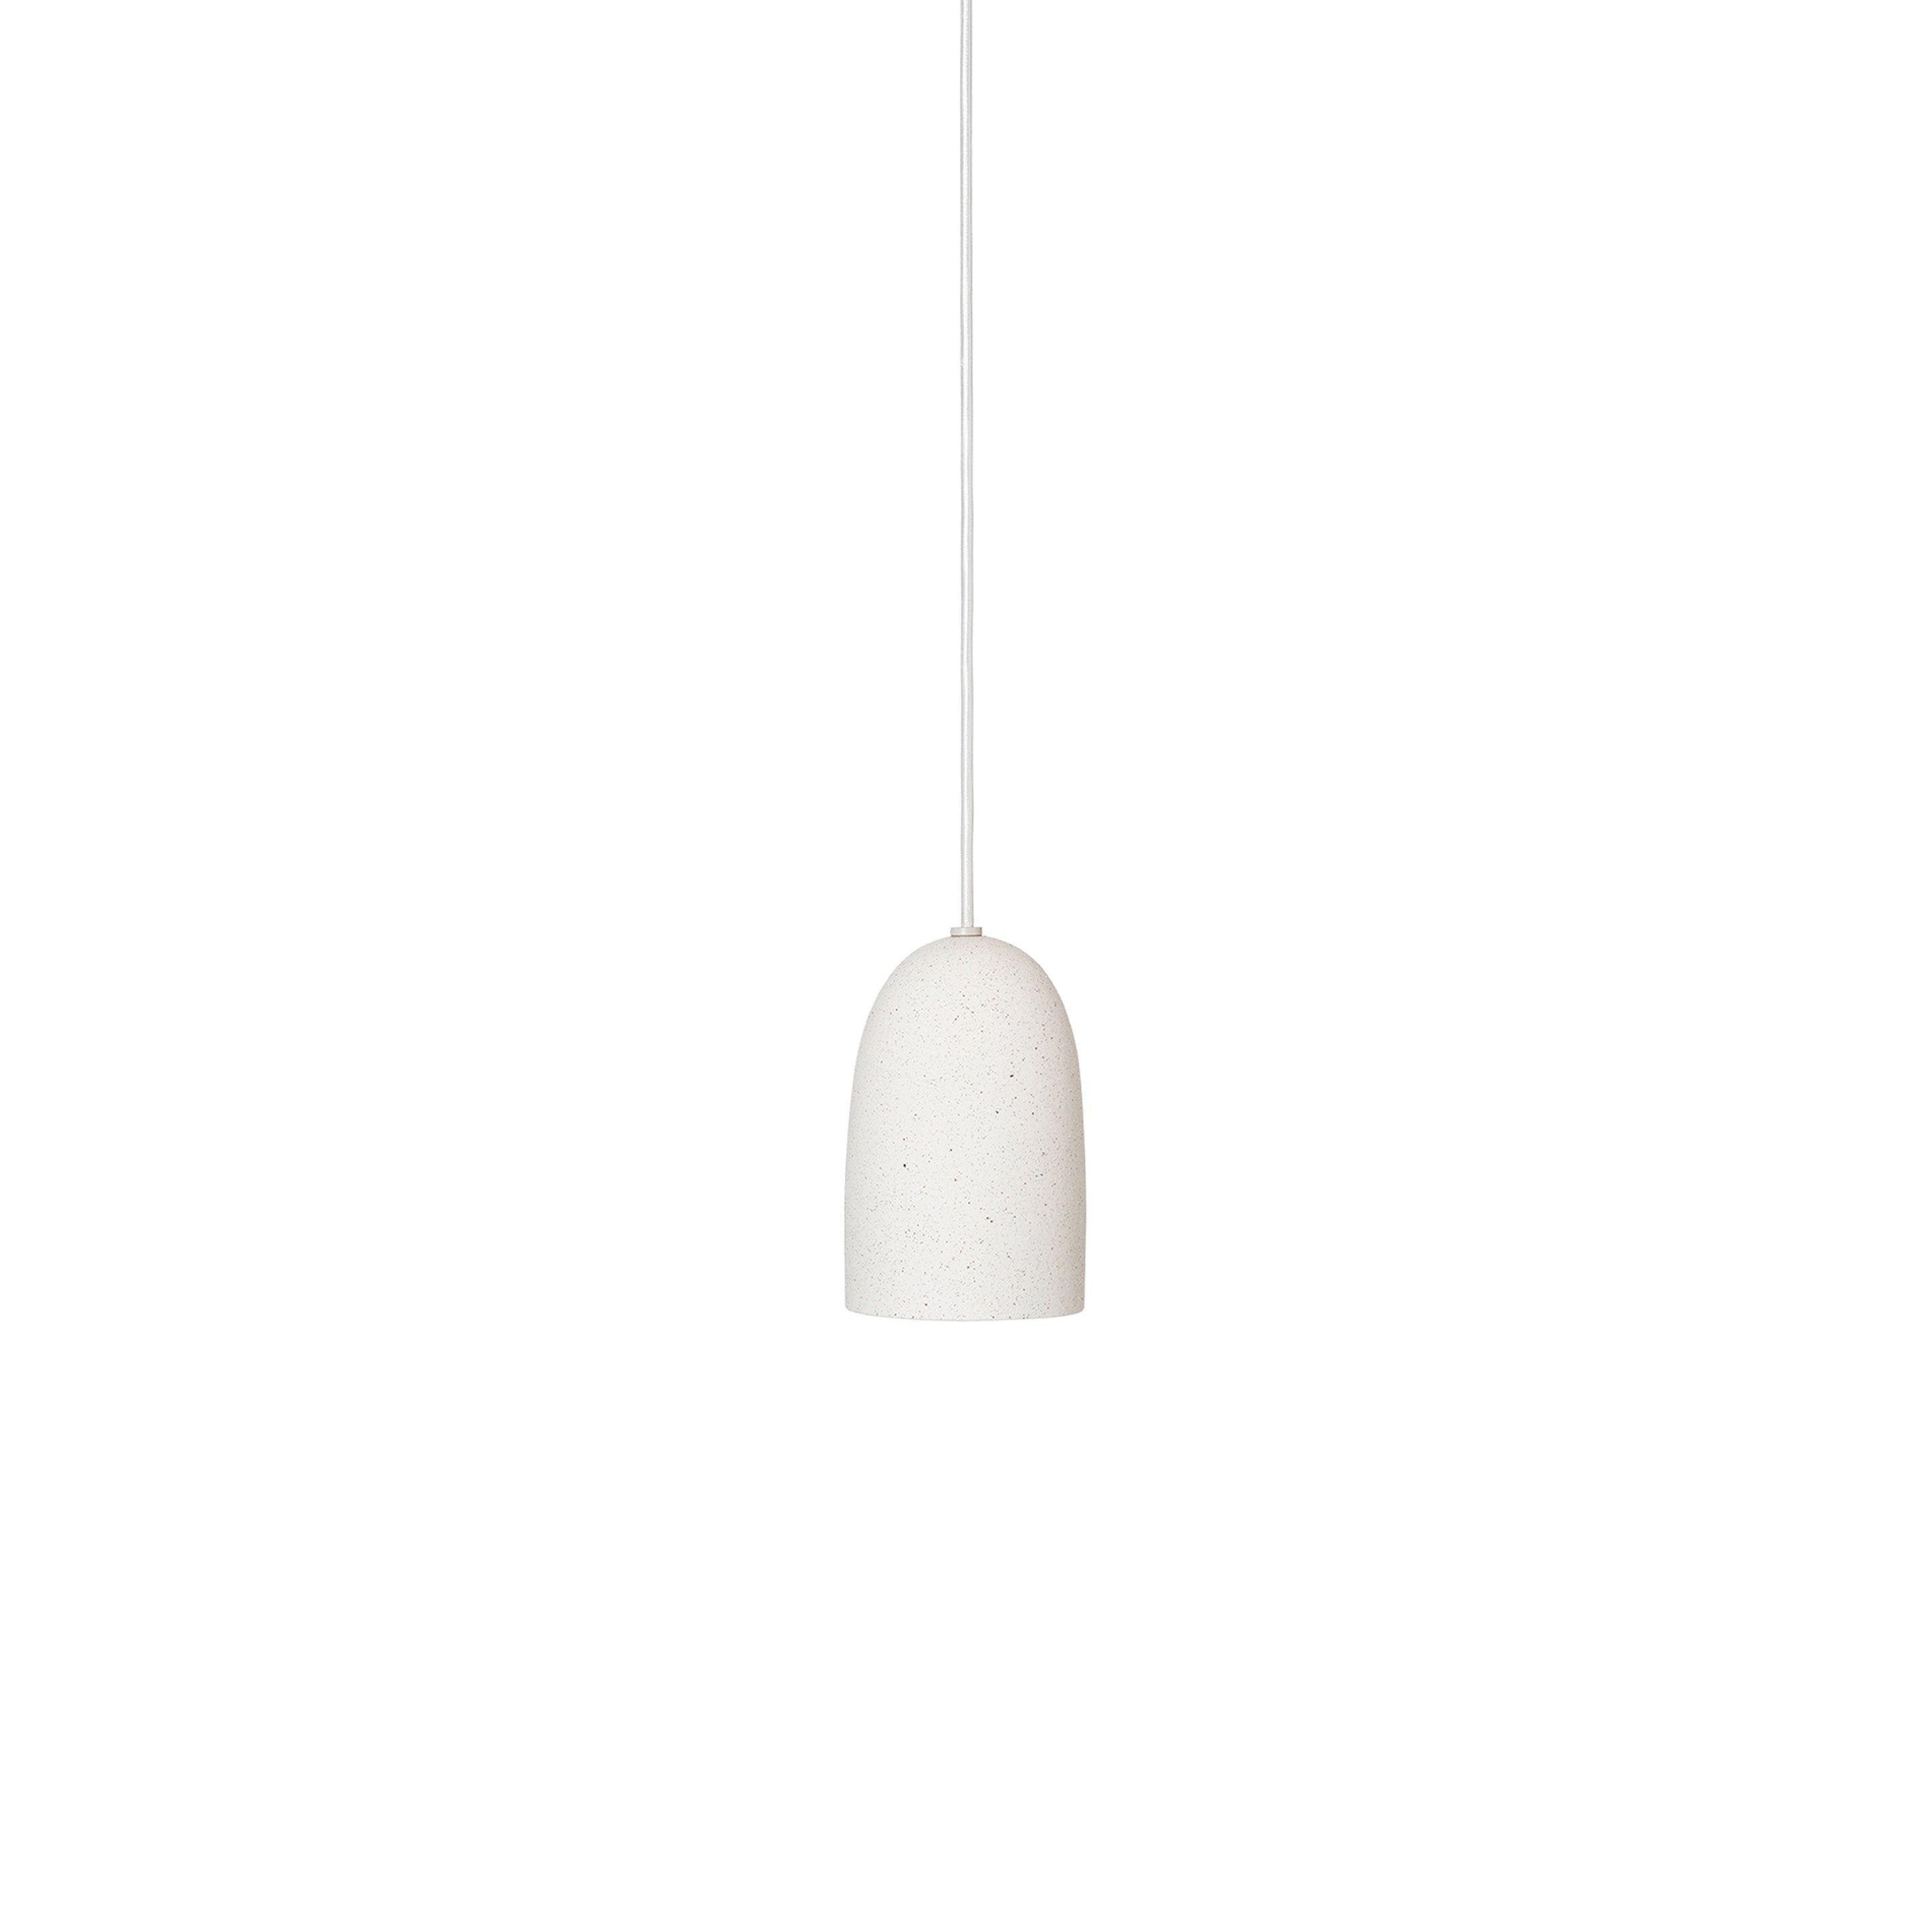 Speckle Pendant Lamp: Small - 4.6